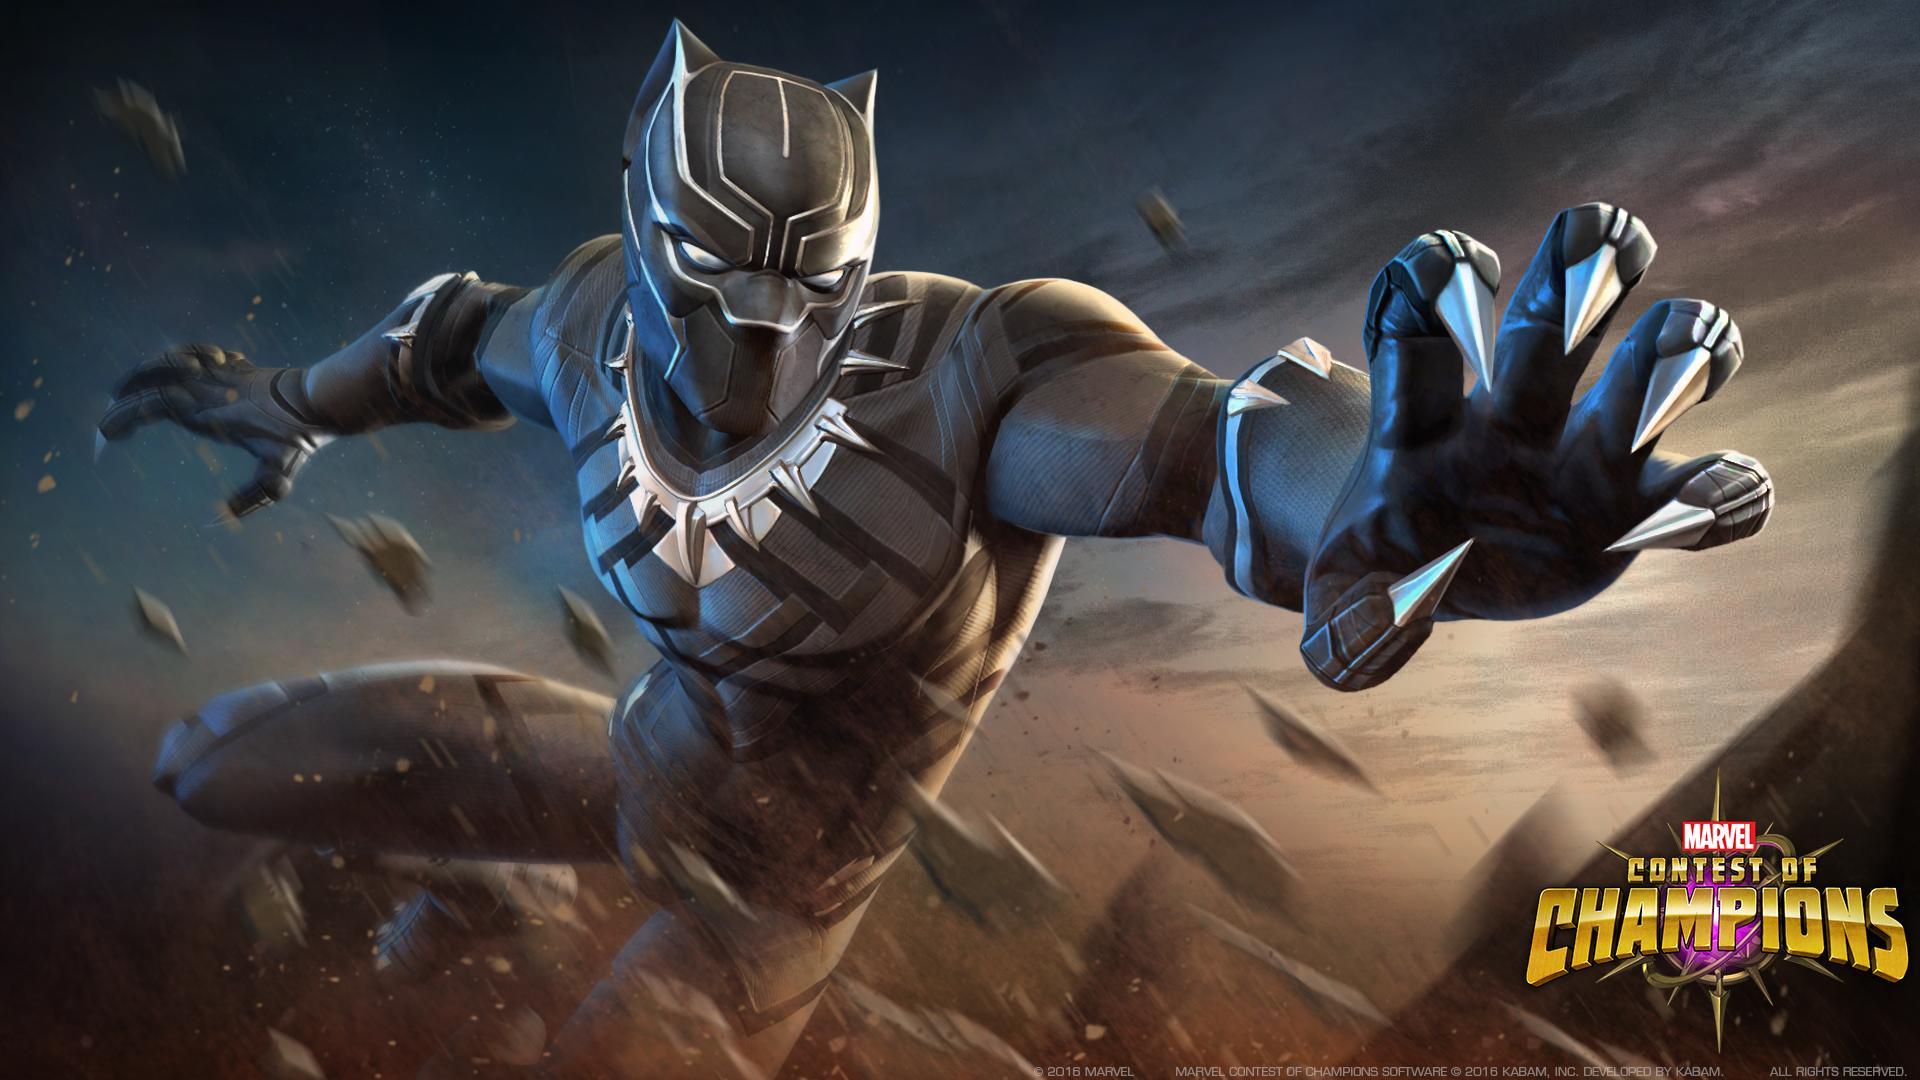 Black Panther Movie Wallpaper for Android